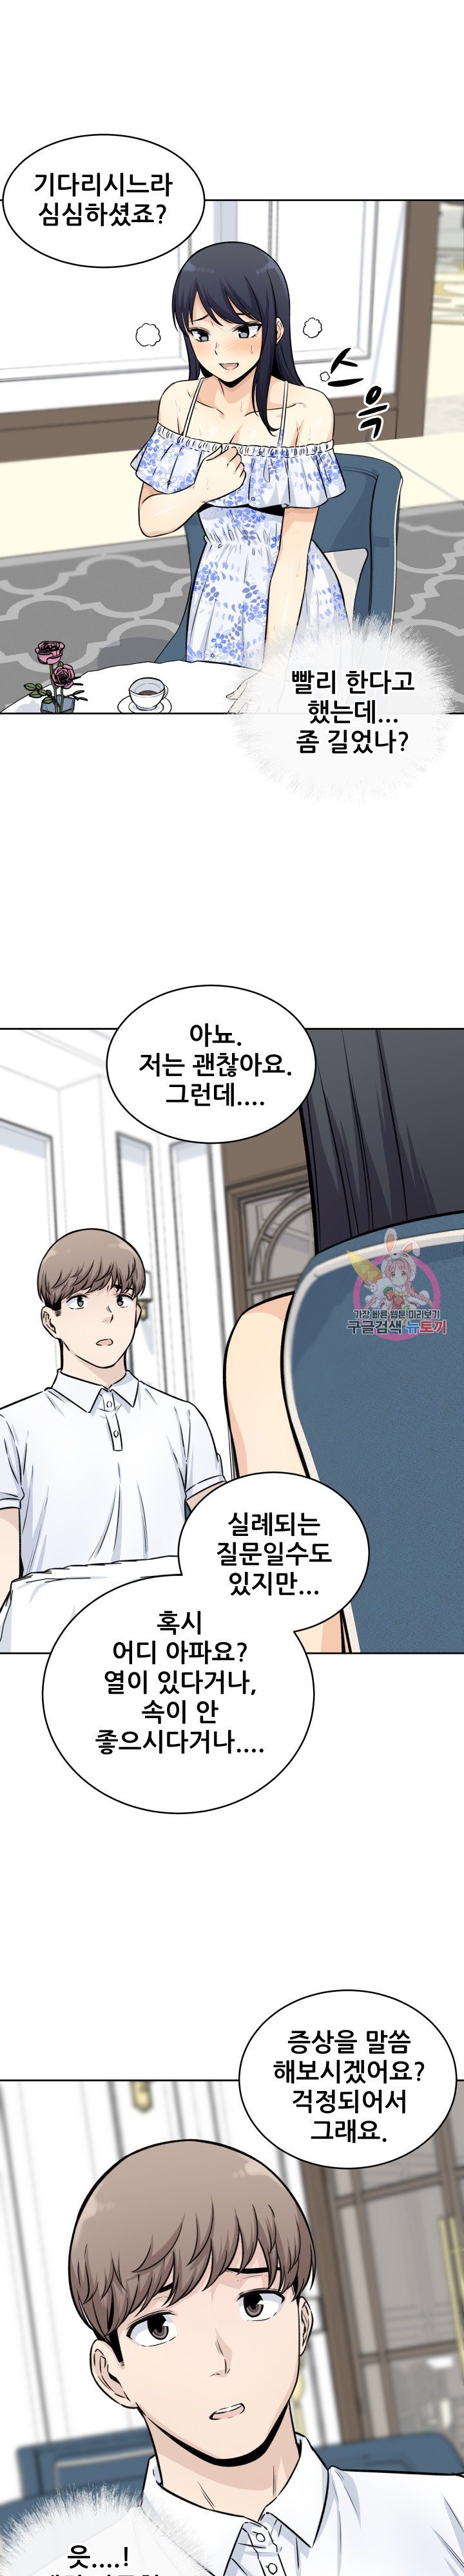 the-ark-is-me-raw-chap-36-16